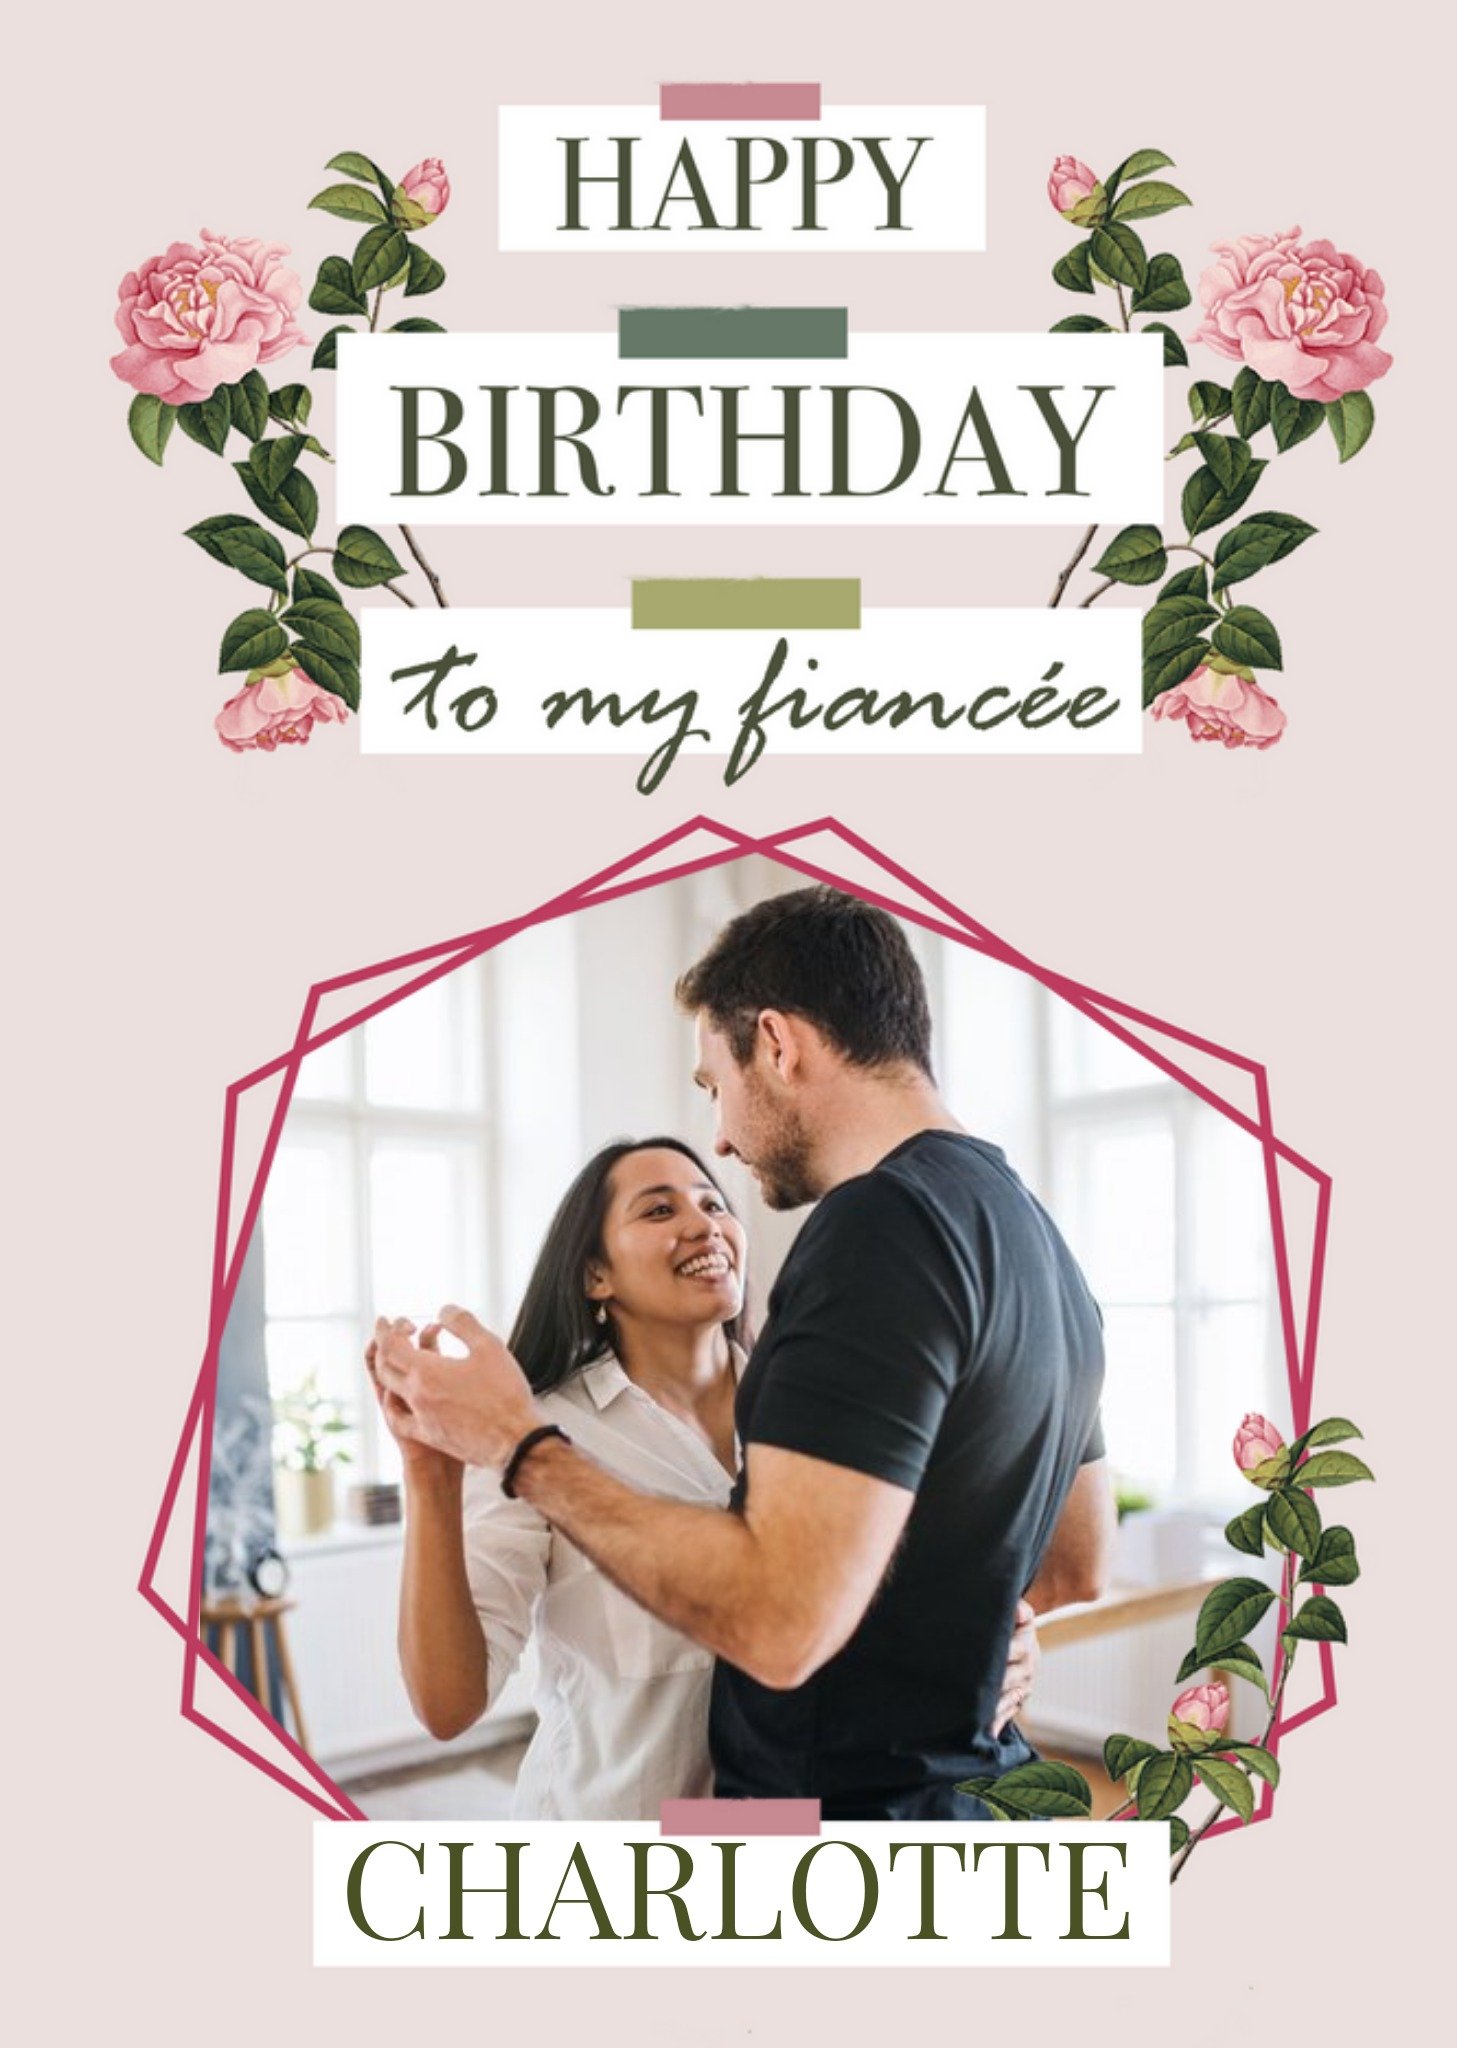 The Natural History Museum Natural History Museum Floral Fiancee Photo Upload Birthday Card, Large